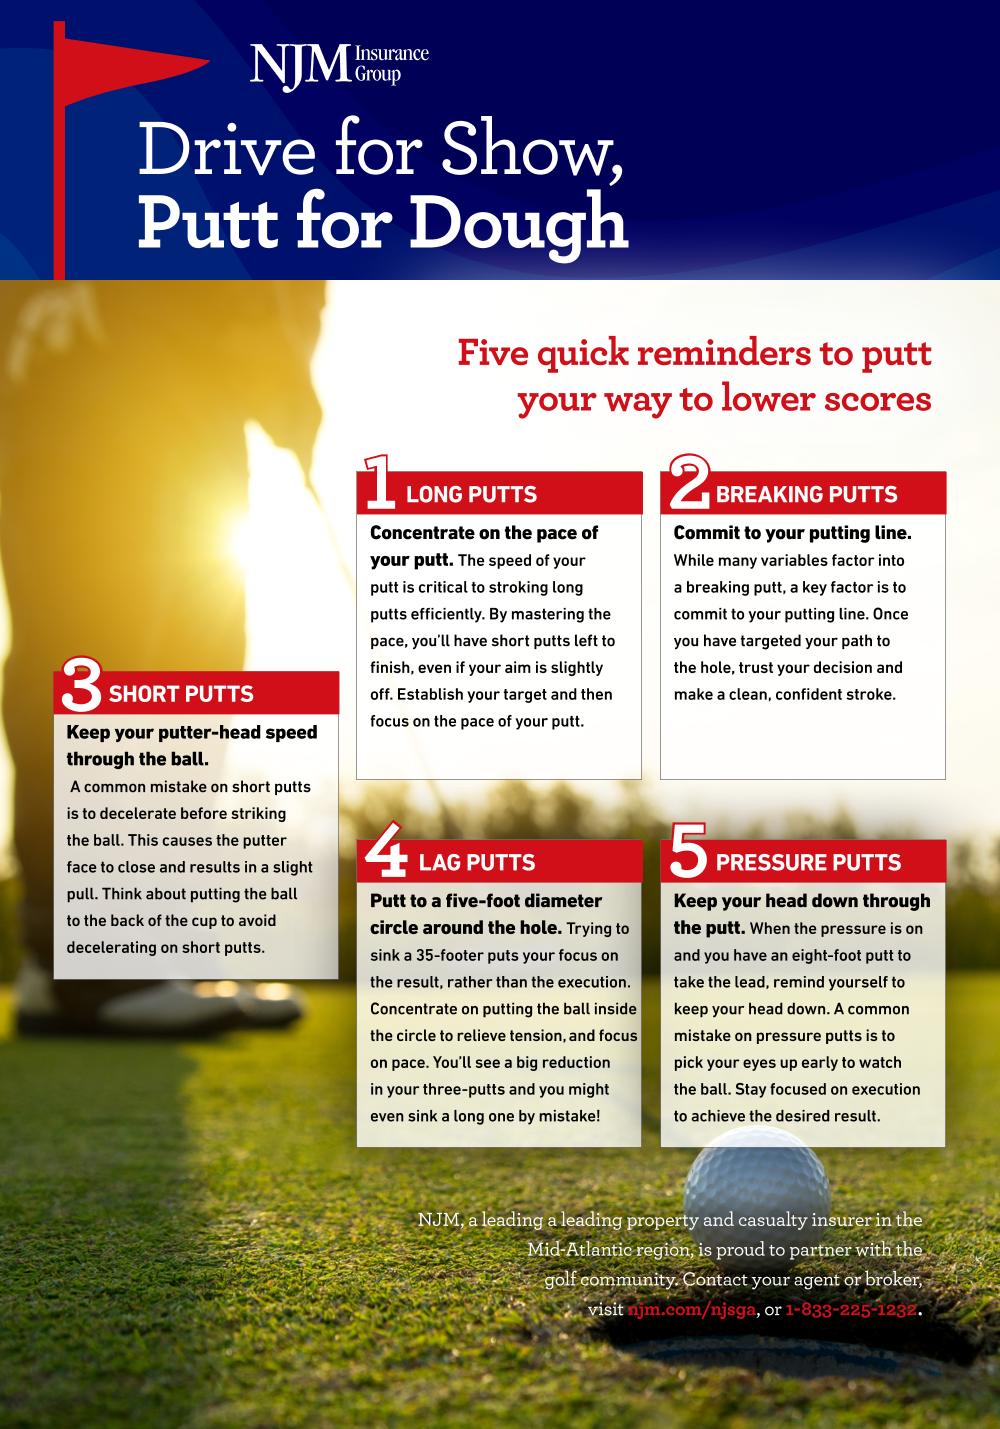 Drive for Show, Putt for Dough